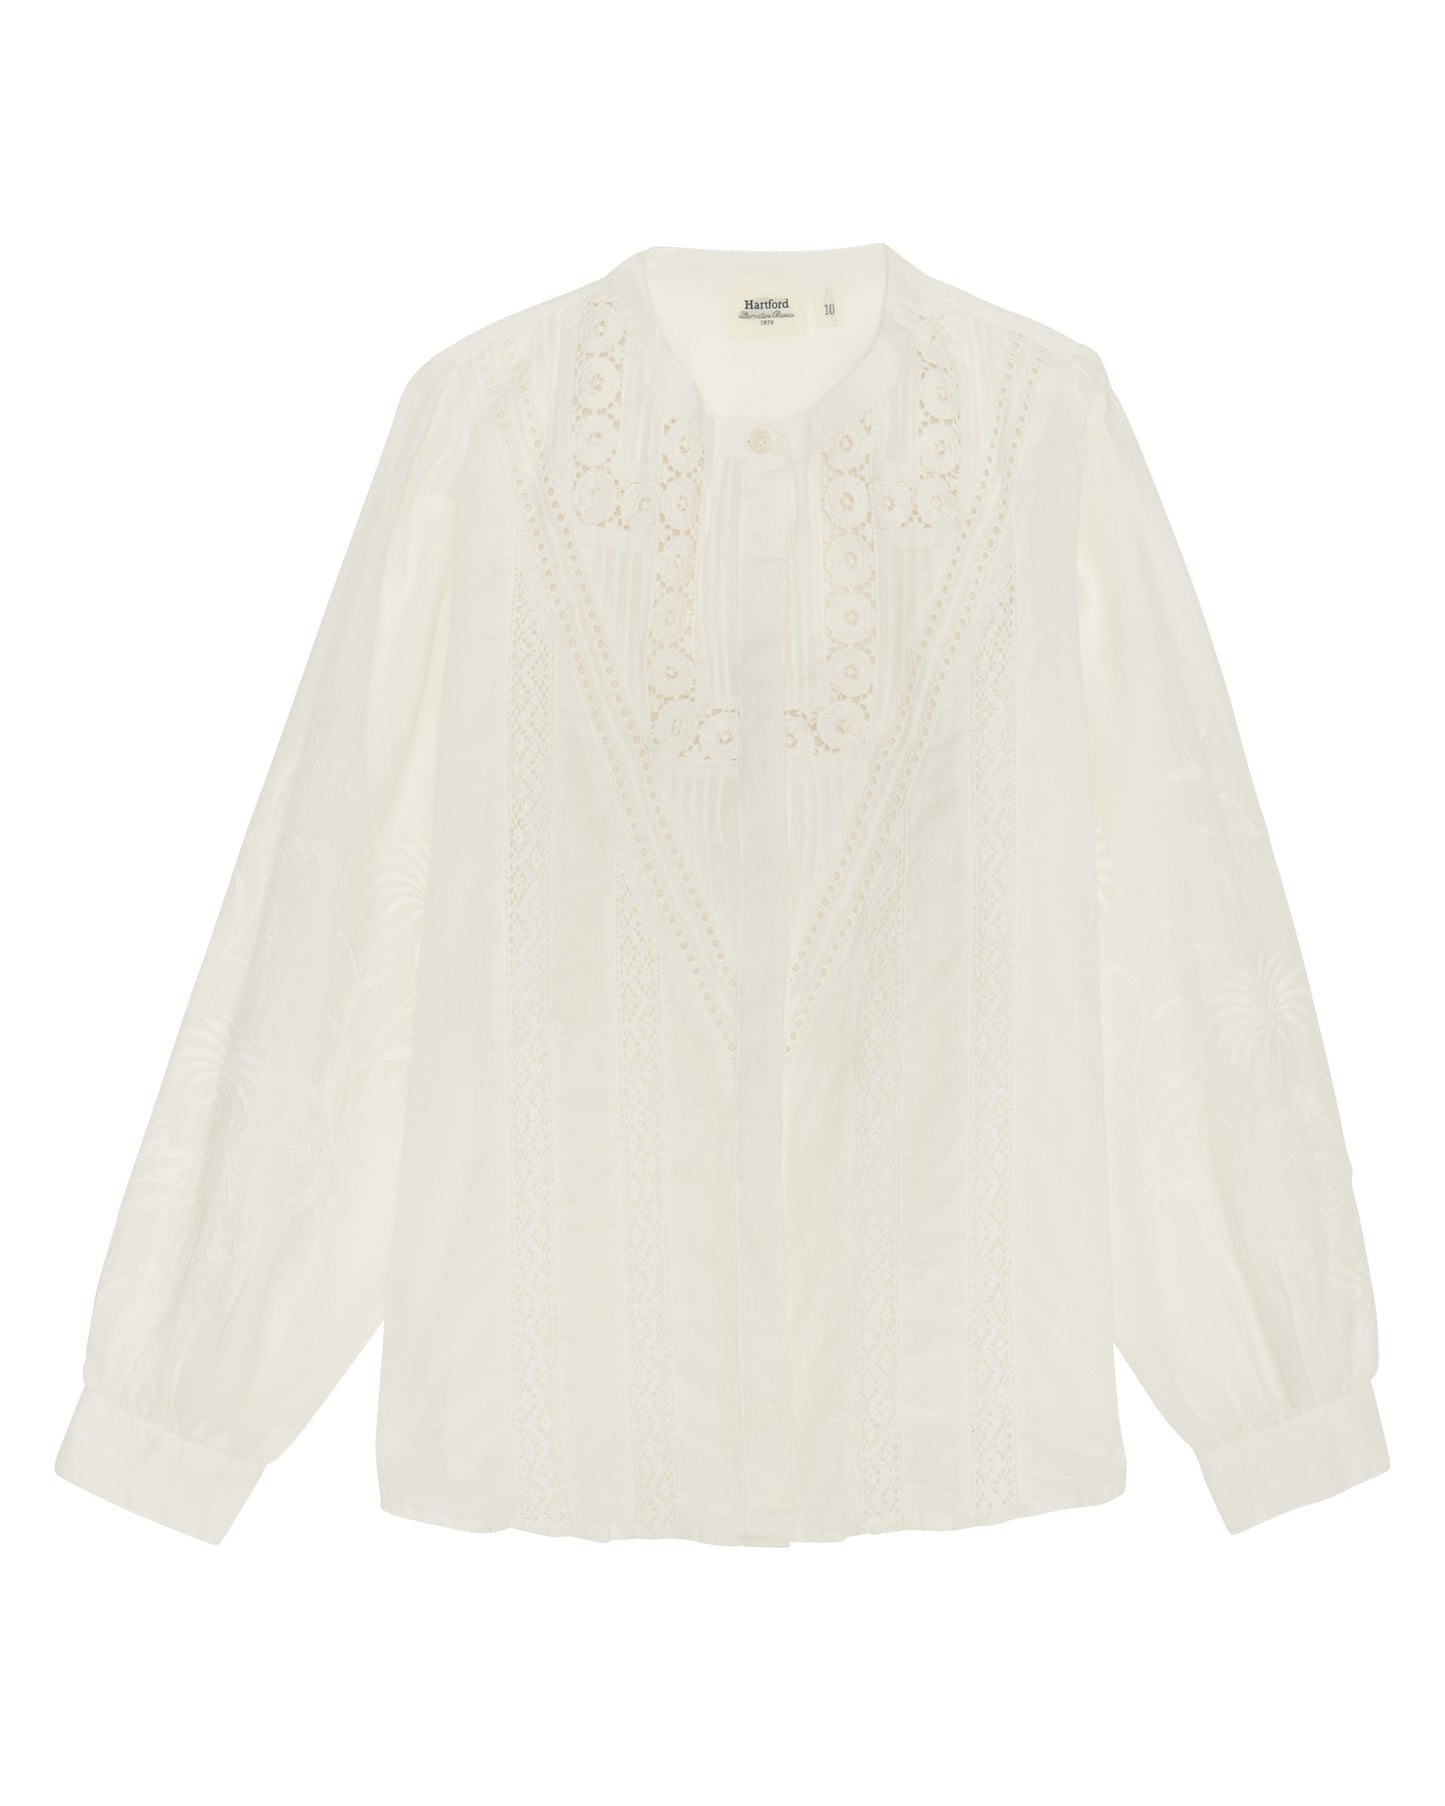 Come Girls' Off-White Cotton Voile Shirt